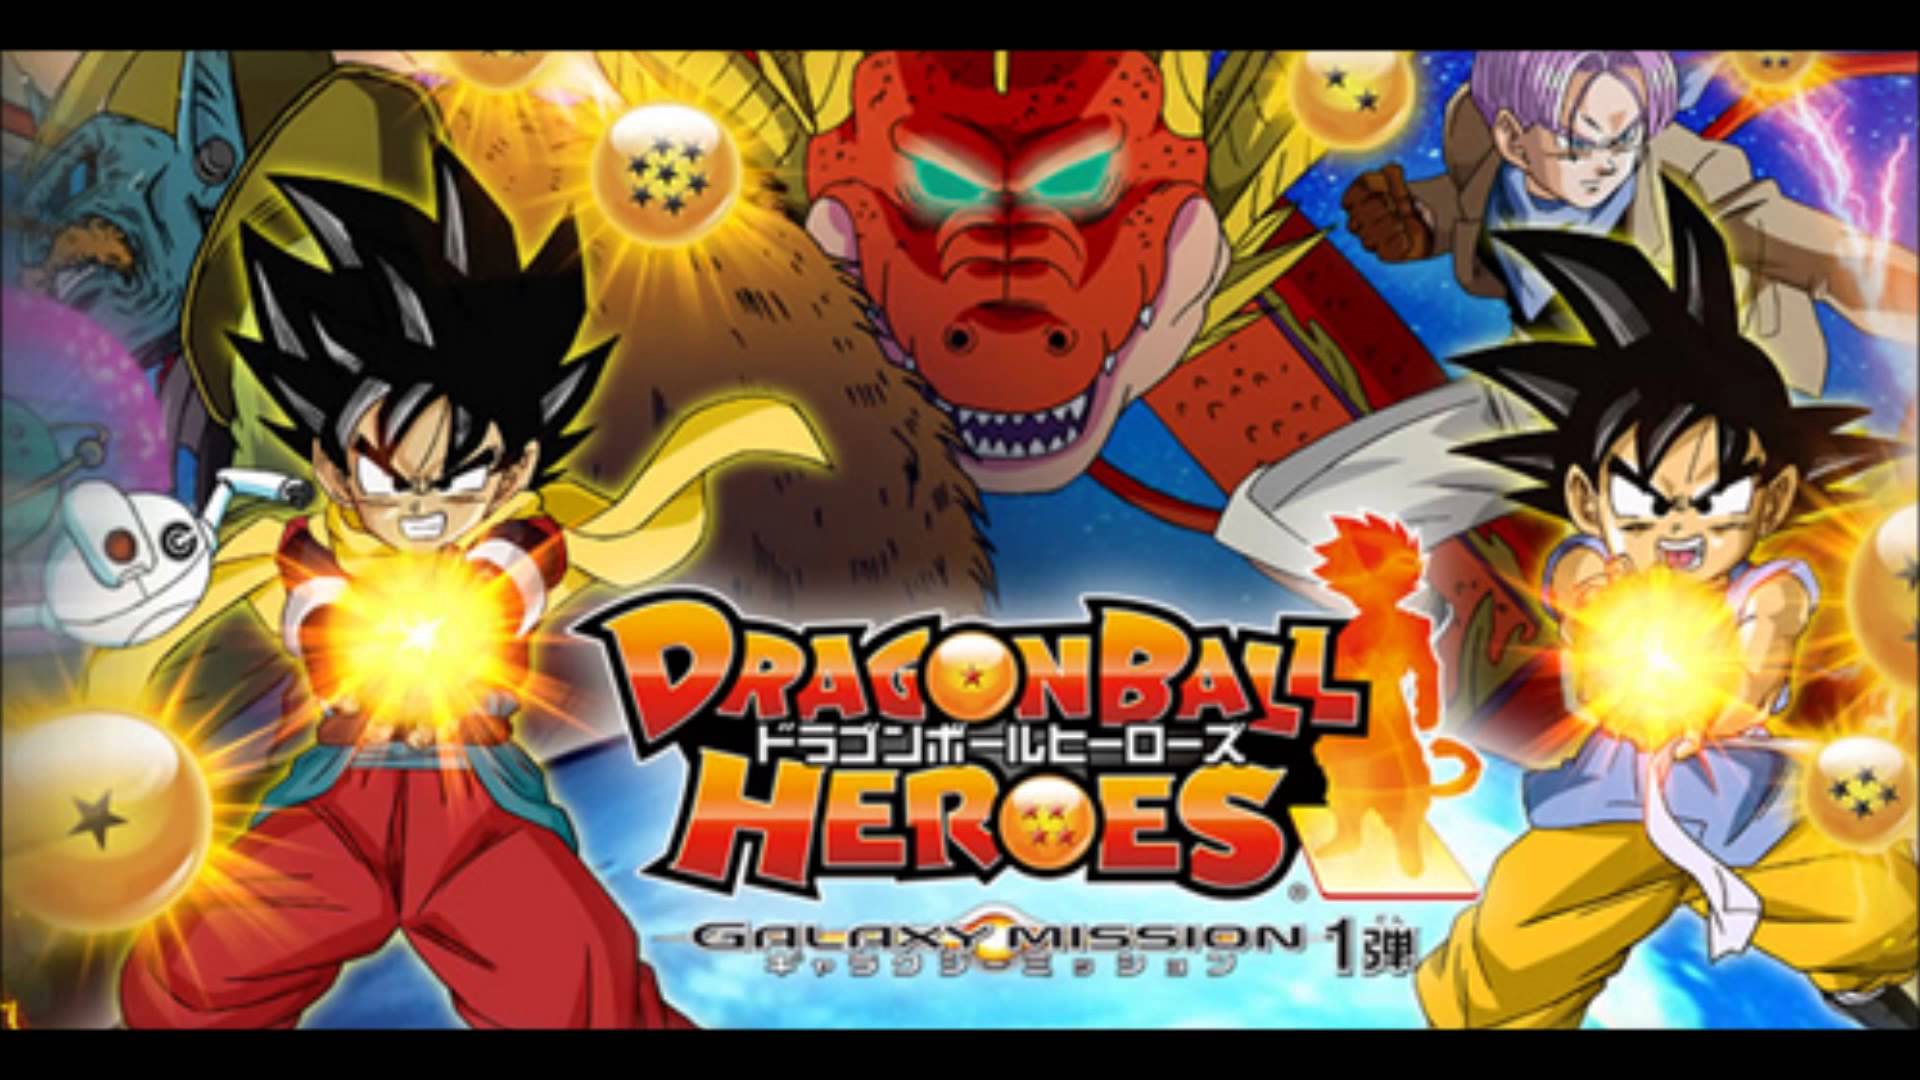 Dragon Ball Heroes Galaxy Mission Series Theme Song